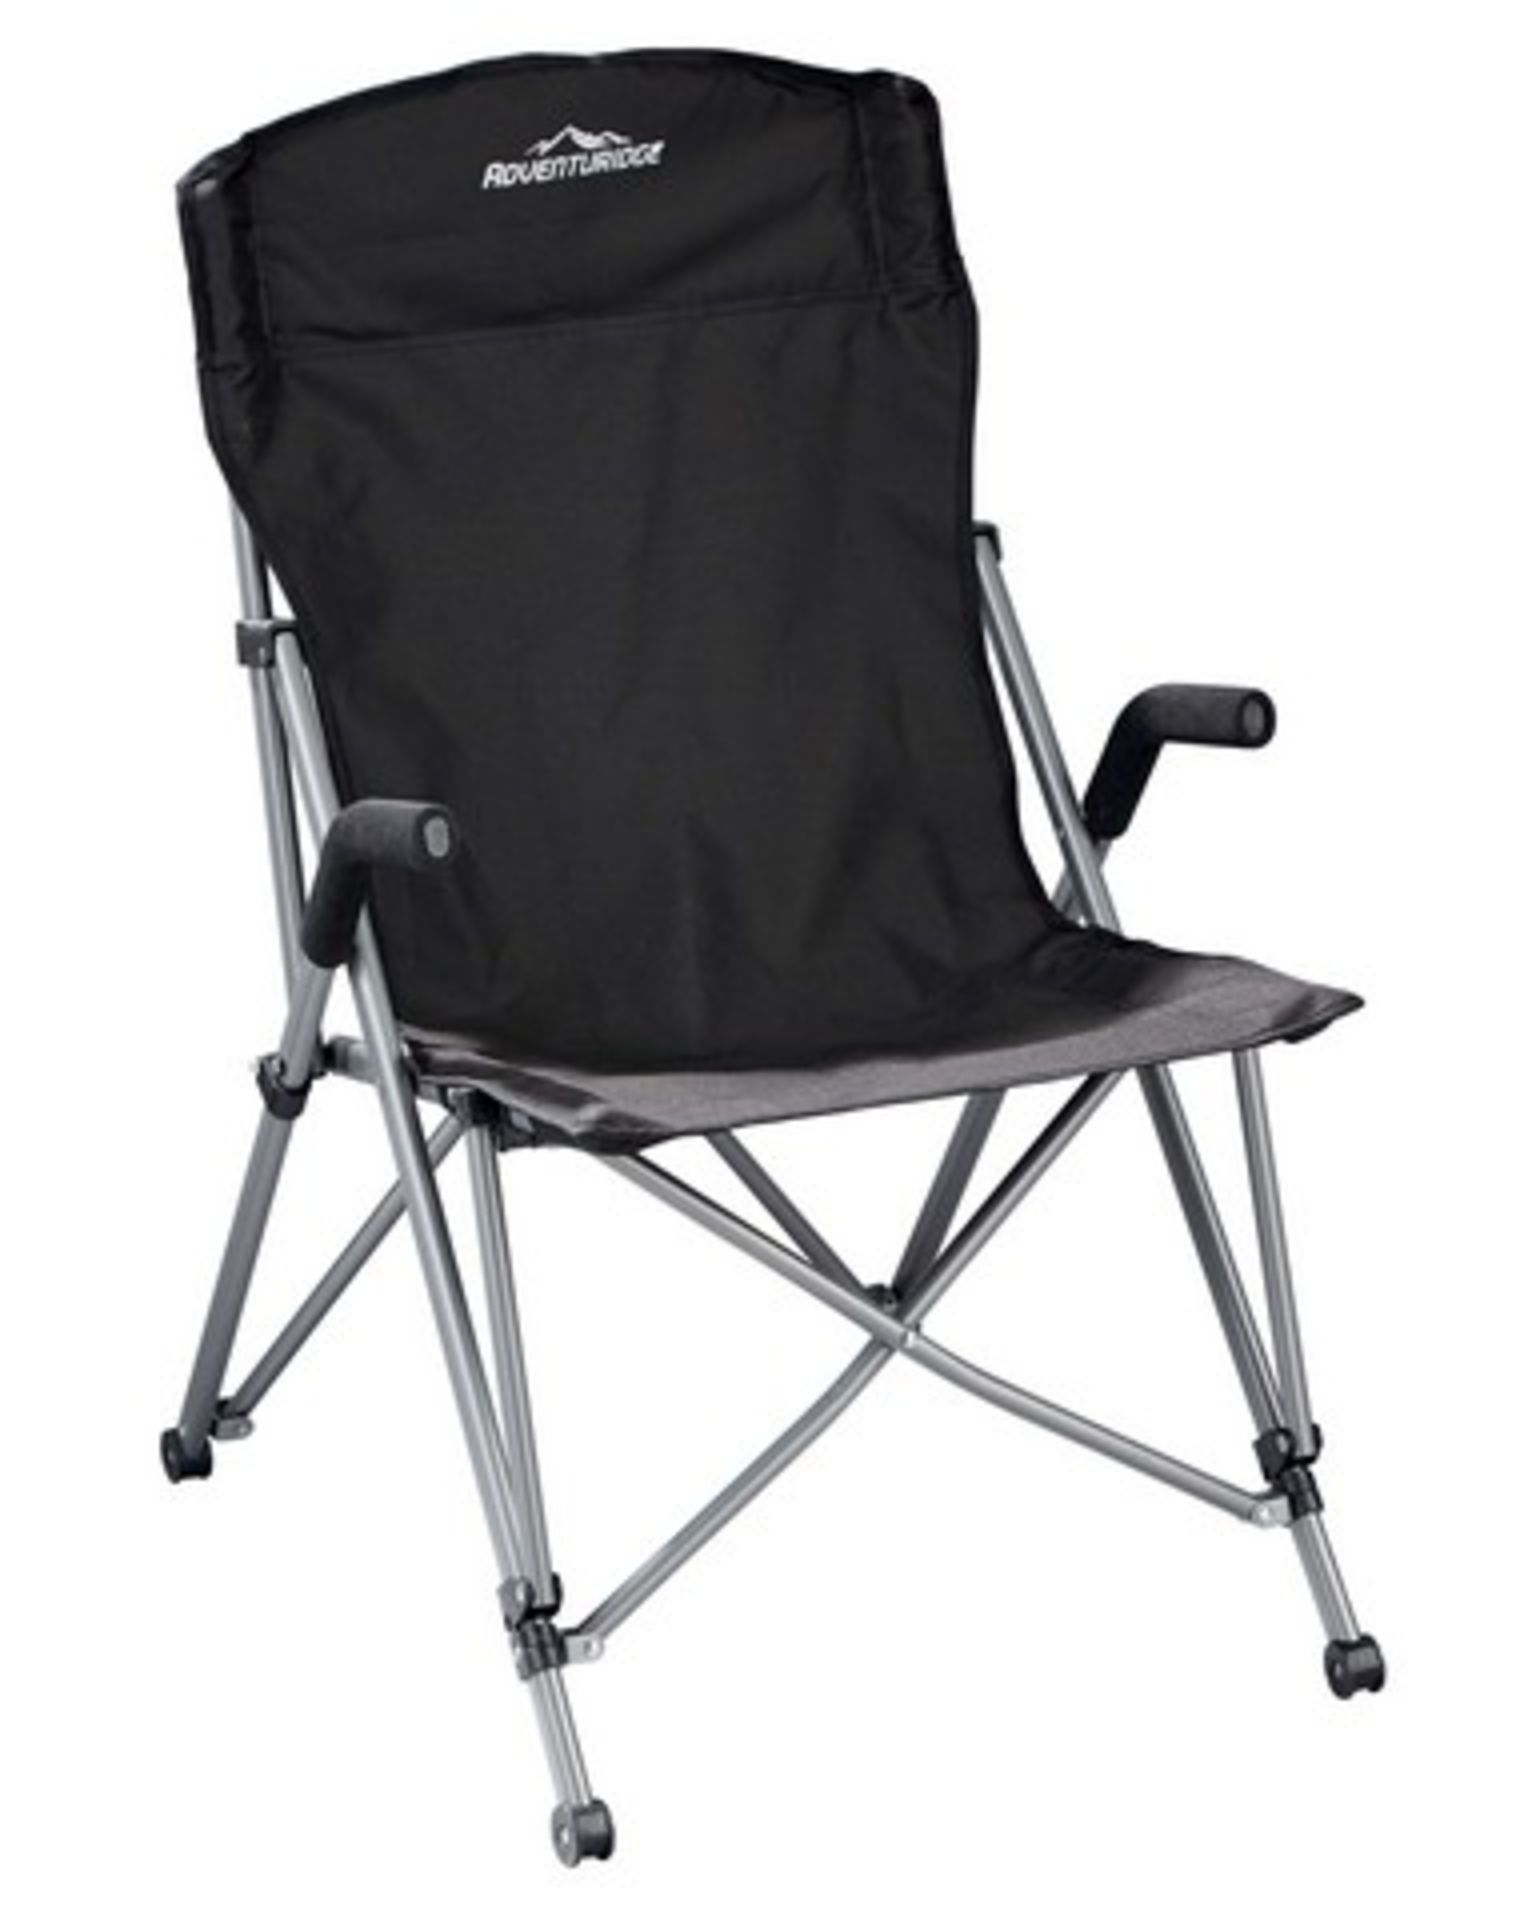 + VAT Brand New Tourer/Expedition Chair In Silver/Black With Carry Case - Lightweight Steel Frame - Image 2 of 2